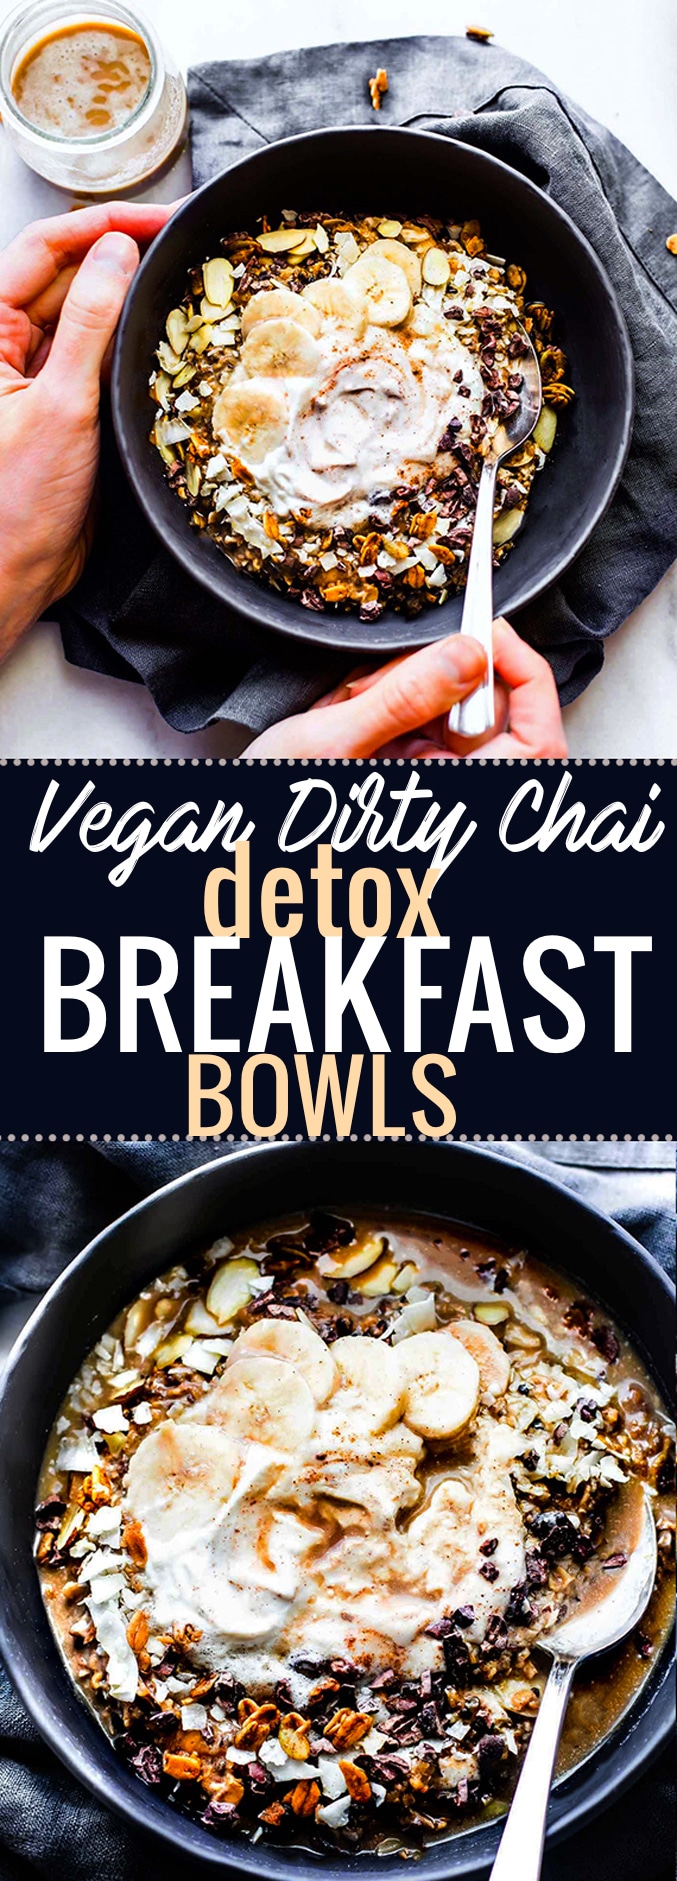 "Detox" Breakfast Bowls that are energy-packed to set your day off right. These Vegan Dirty Chai detox breakfast bowls are not only healthy and nourishing, but full of anti-oxidants rich spices and immunity boosting nutrients. Gluten free oats, almonds, and quinoa soaked in a coconut milk based dirty chai. Topped with cacao nibs and coconut cream. A breakfast bowl that will perk you up in no time! @cottercrunch www.cottercrunch.com